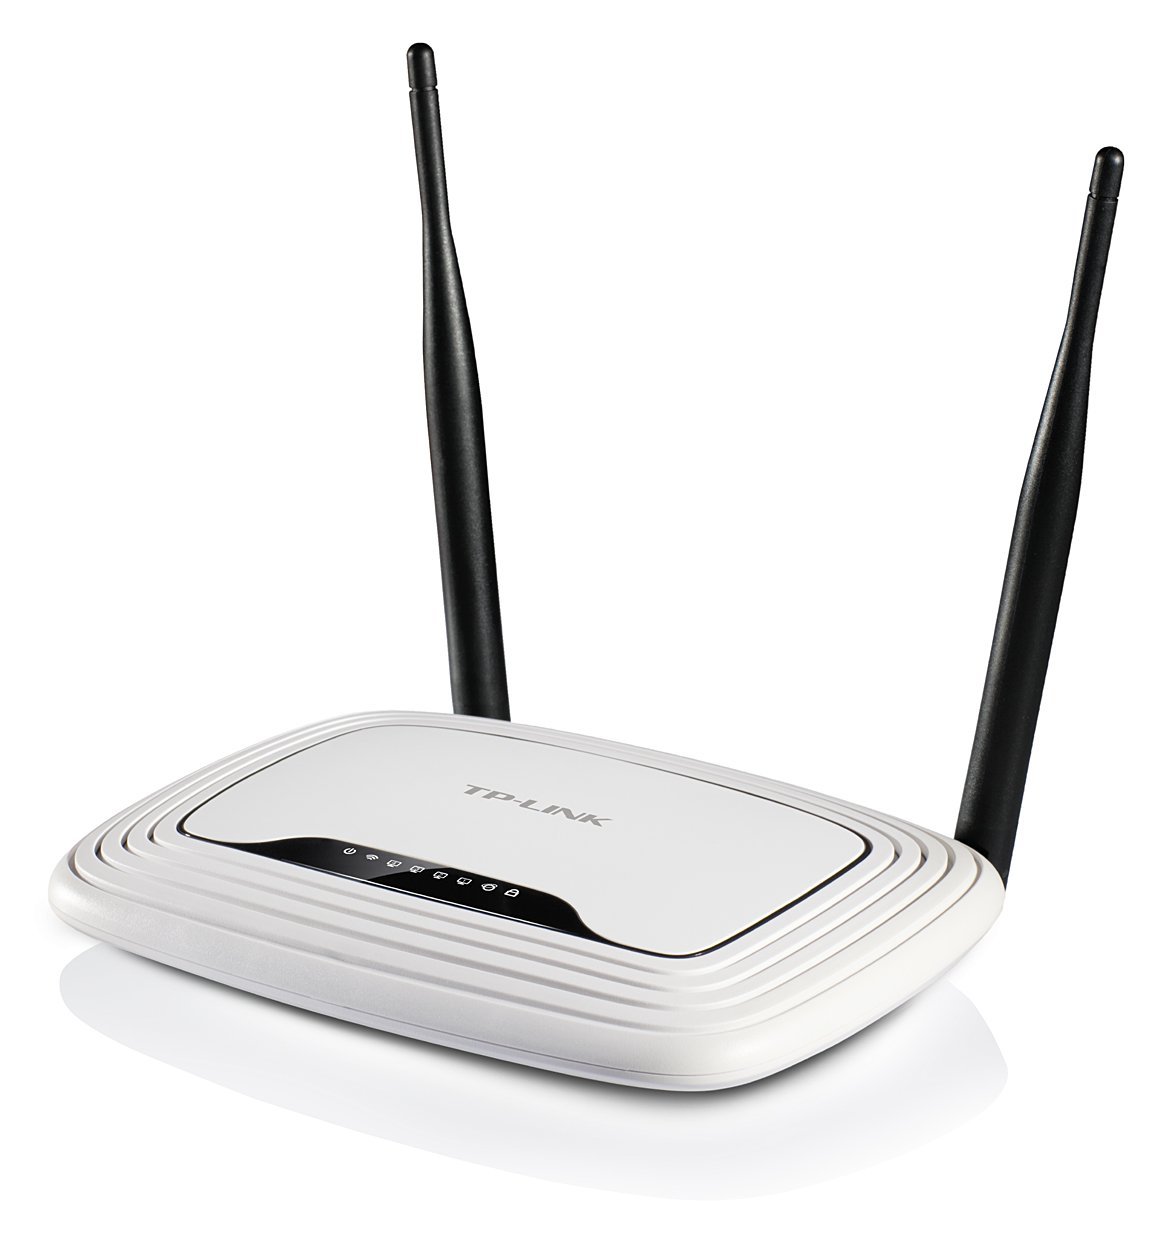 TP-LINK TL-WR841N Wireless N300 Home Router, 300Mpbs (side)